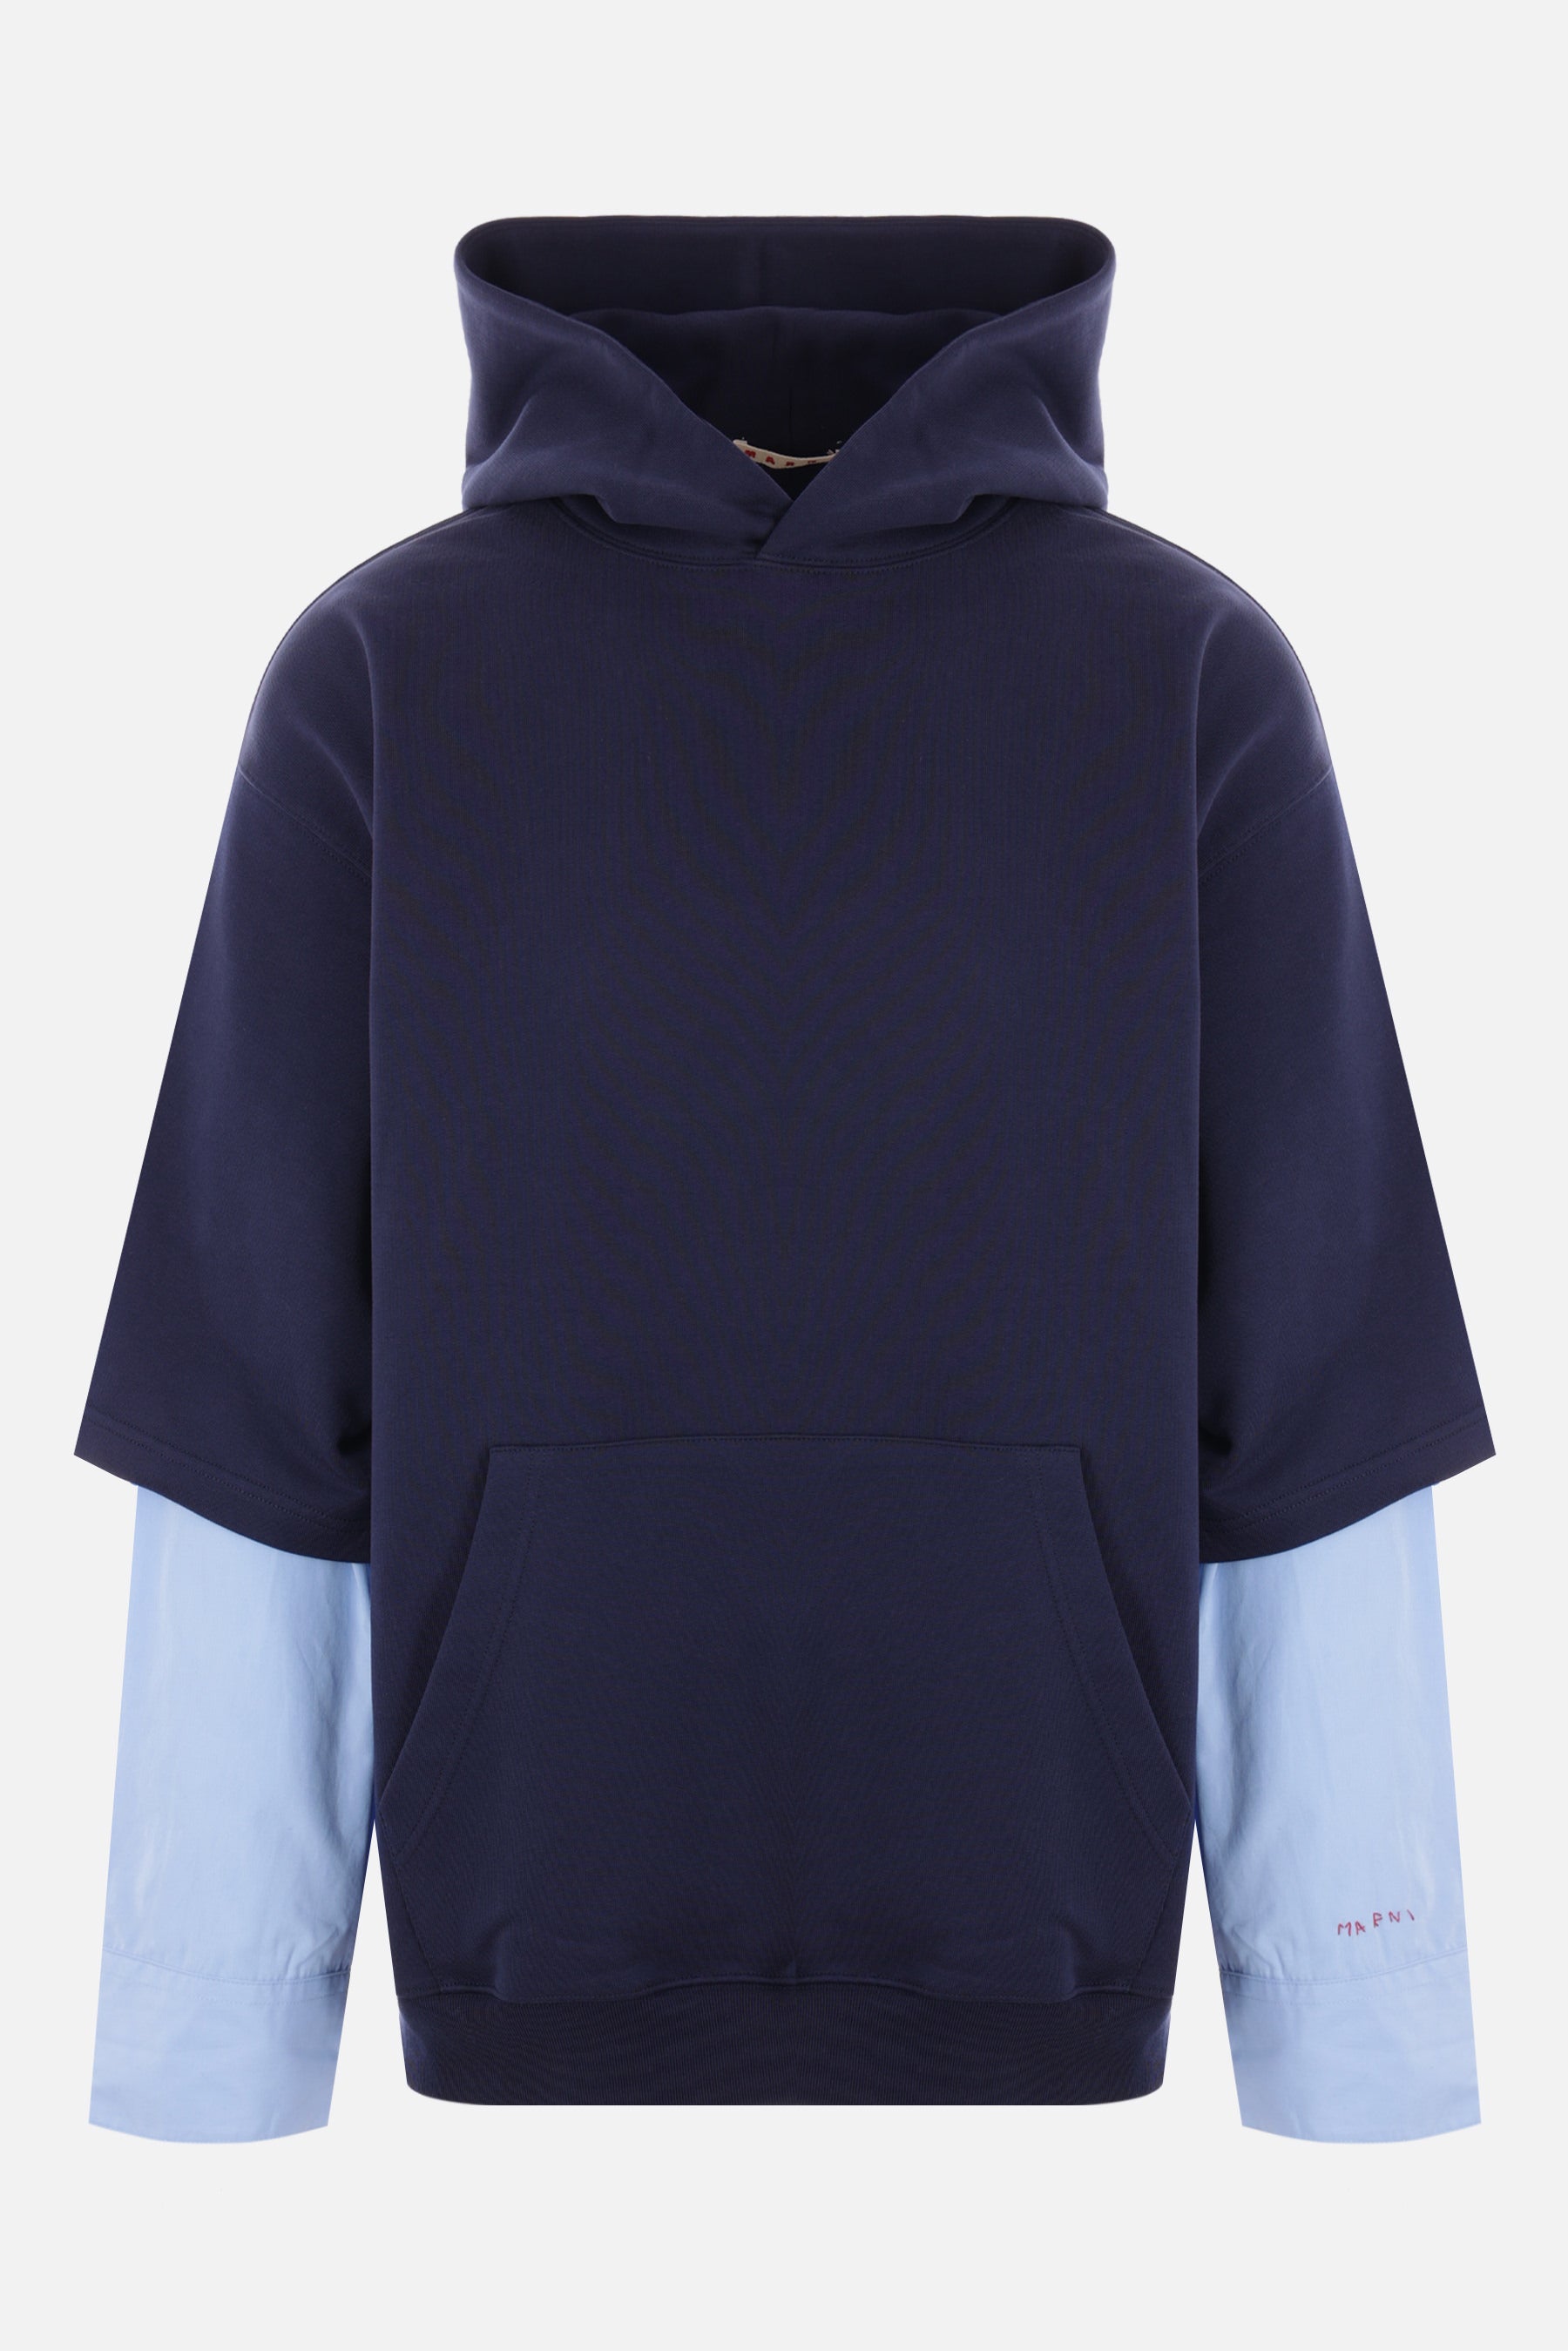 oversize jersey hoodie with shirt-style sleeves